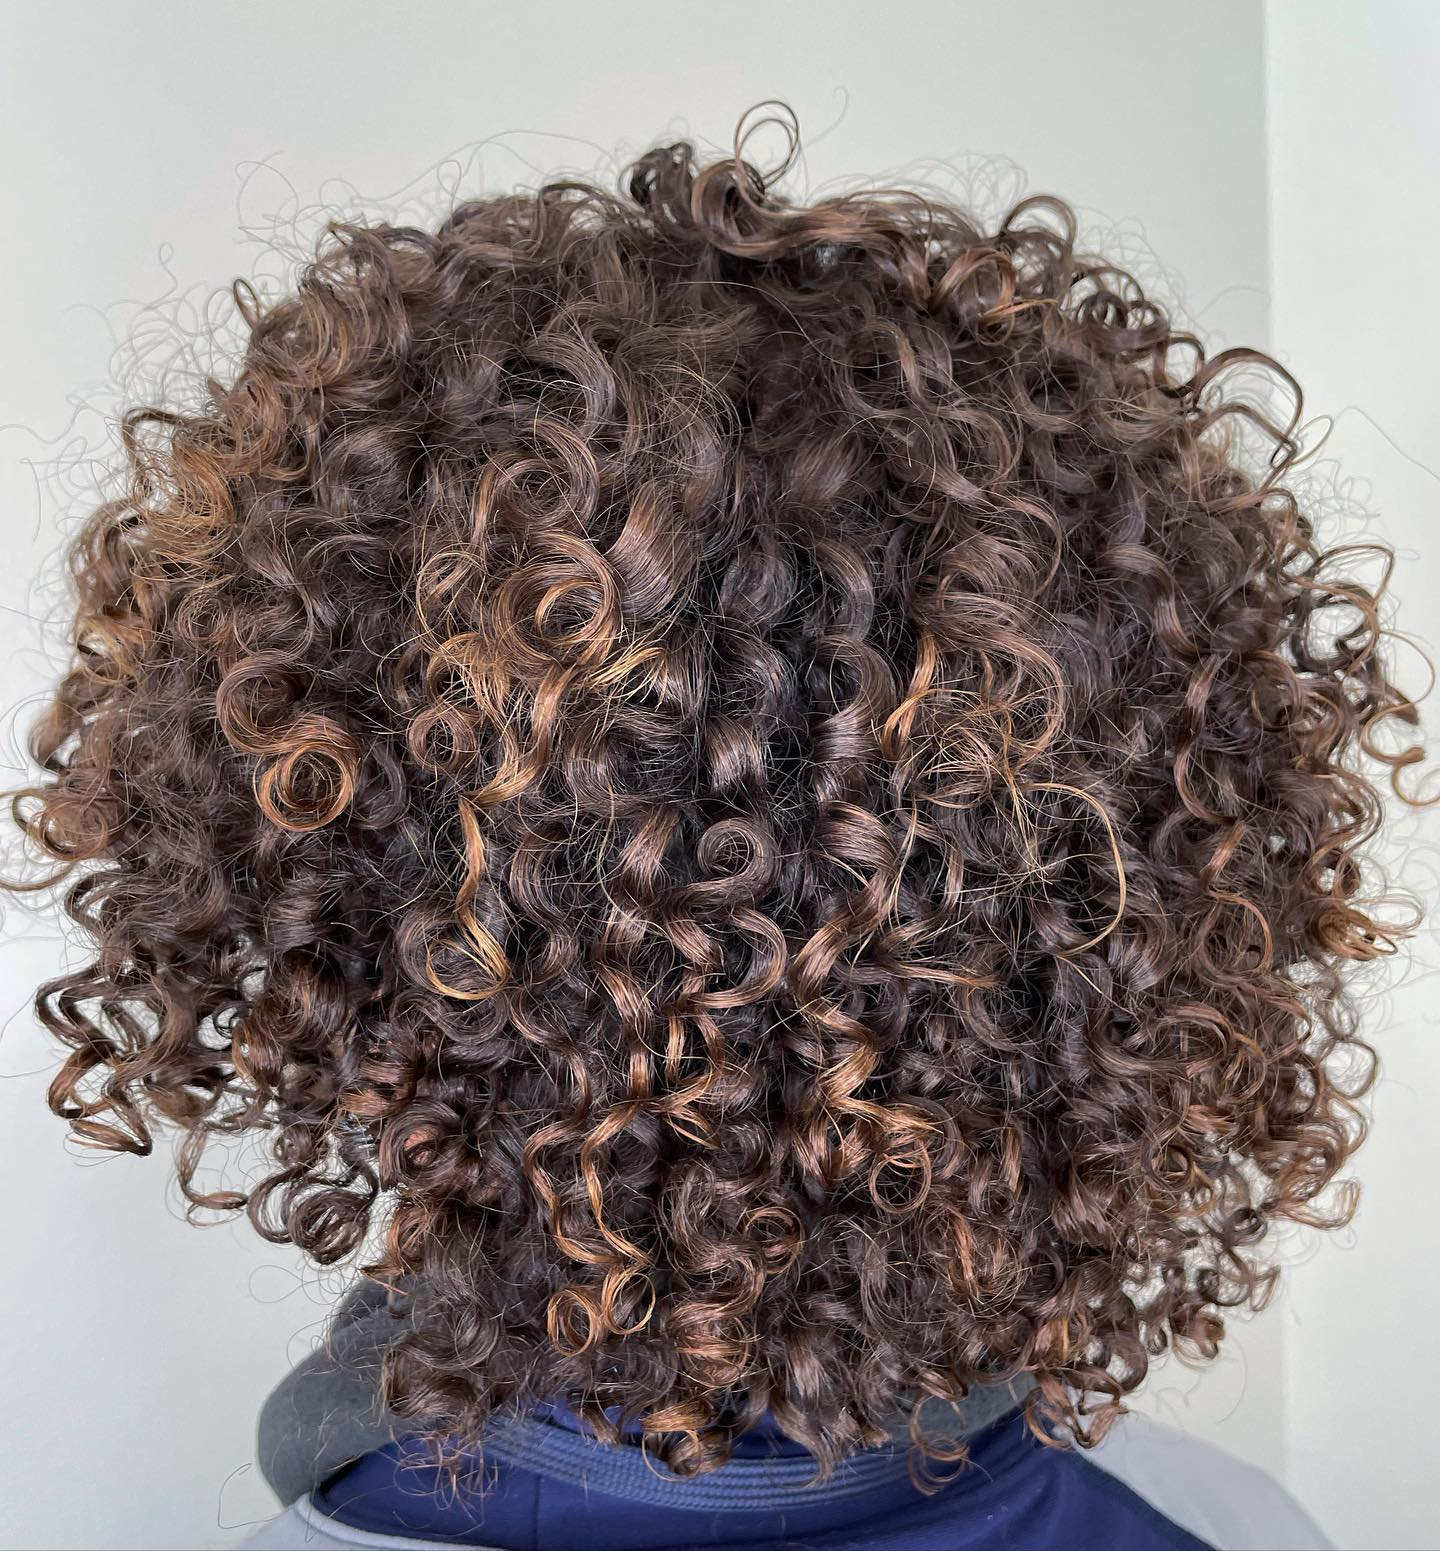 Achieve the Most Stylish Look with Men Curly Hair System